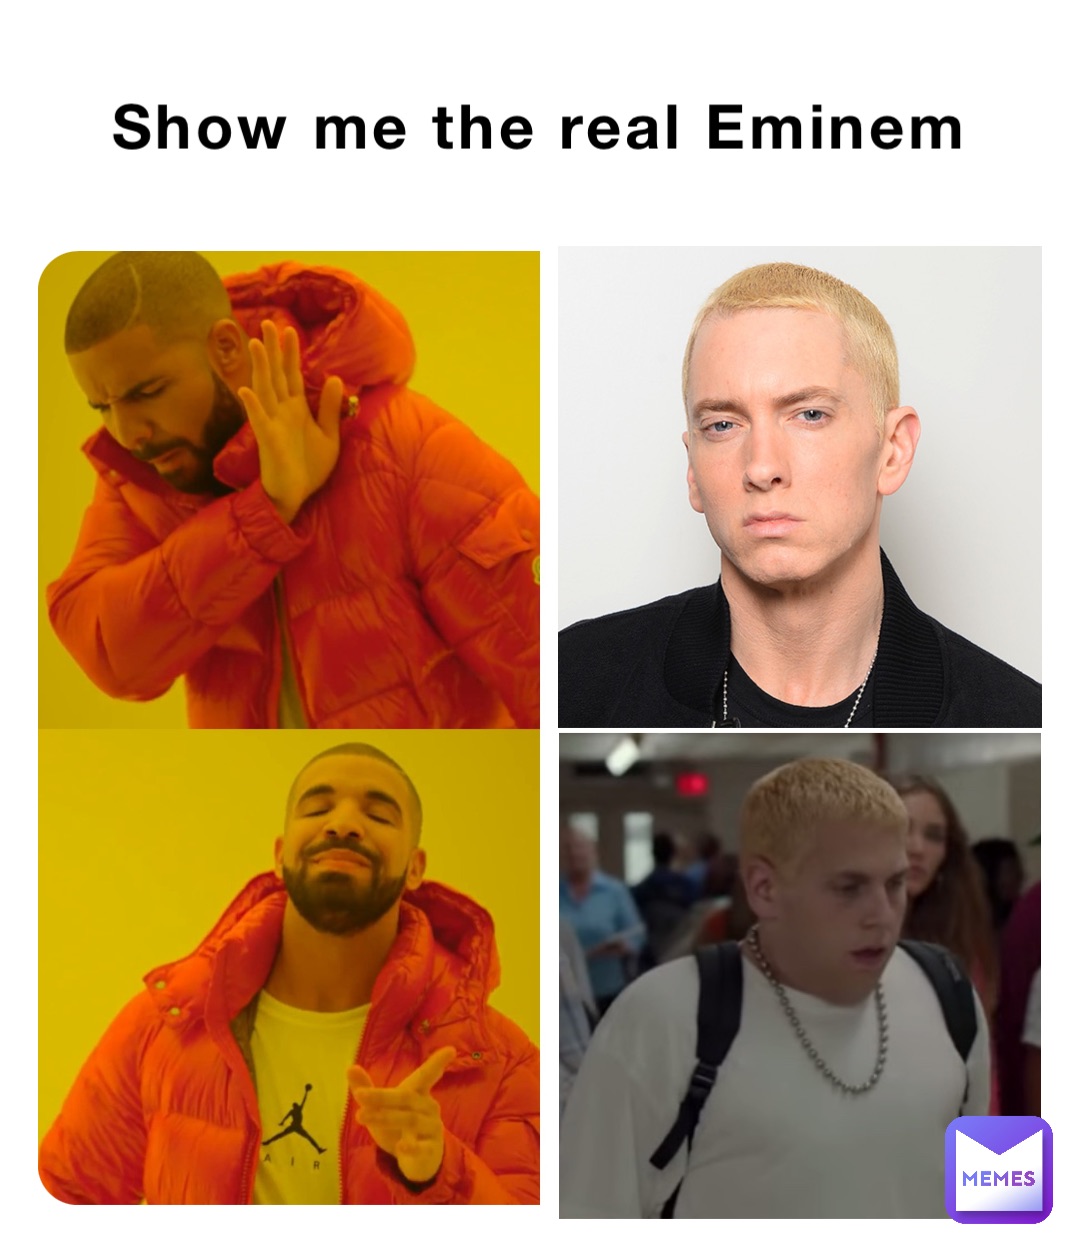 Show me the real Eminem